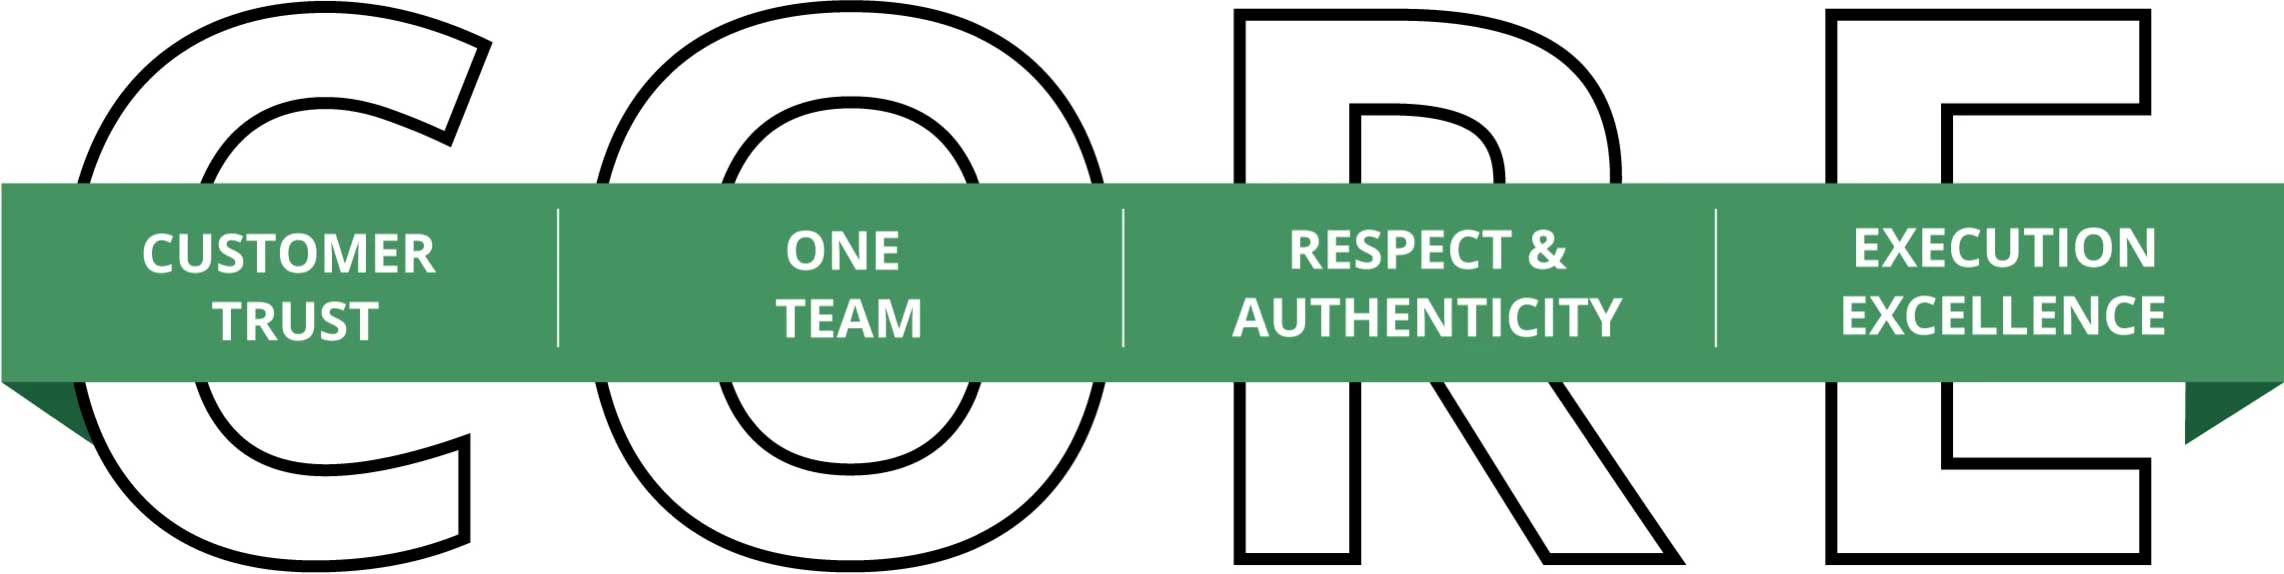 Image showing Vena's core values: Customer trust, one team, Respect & Authenticity and Execution Excellence